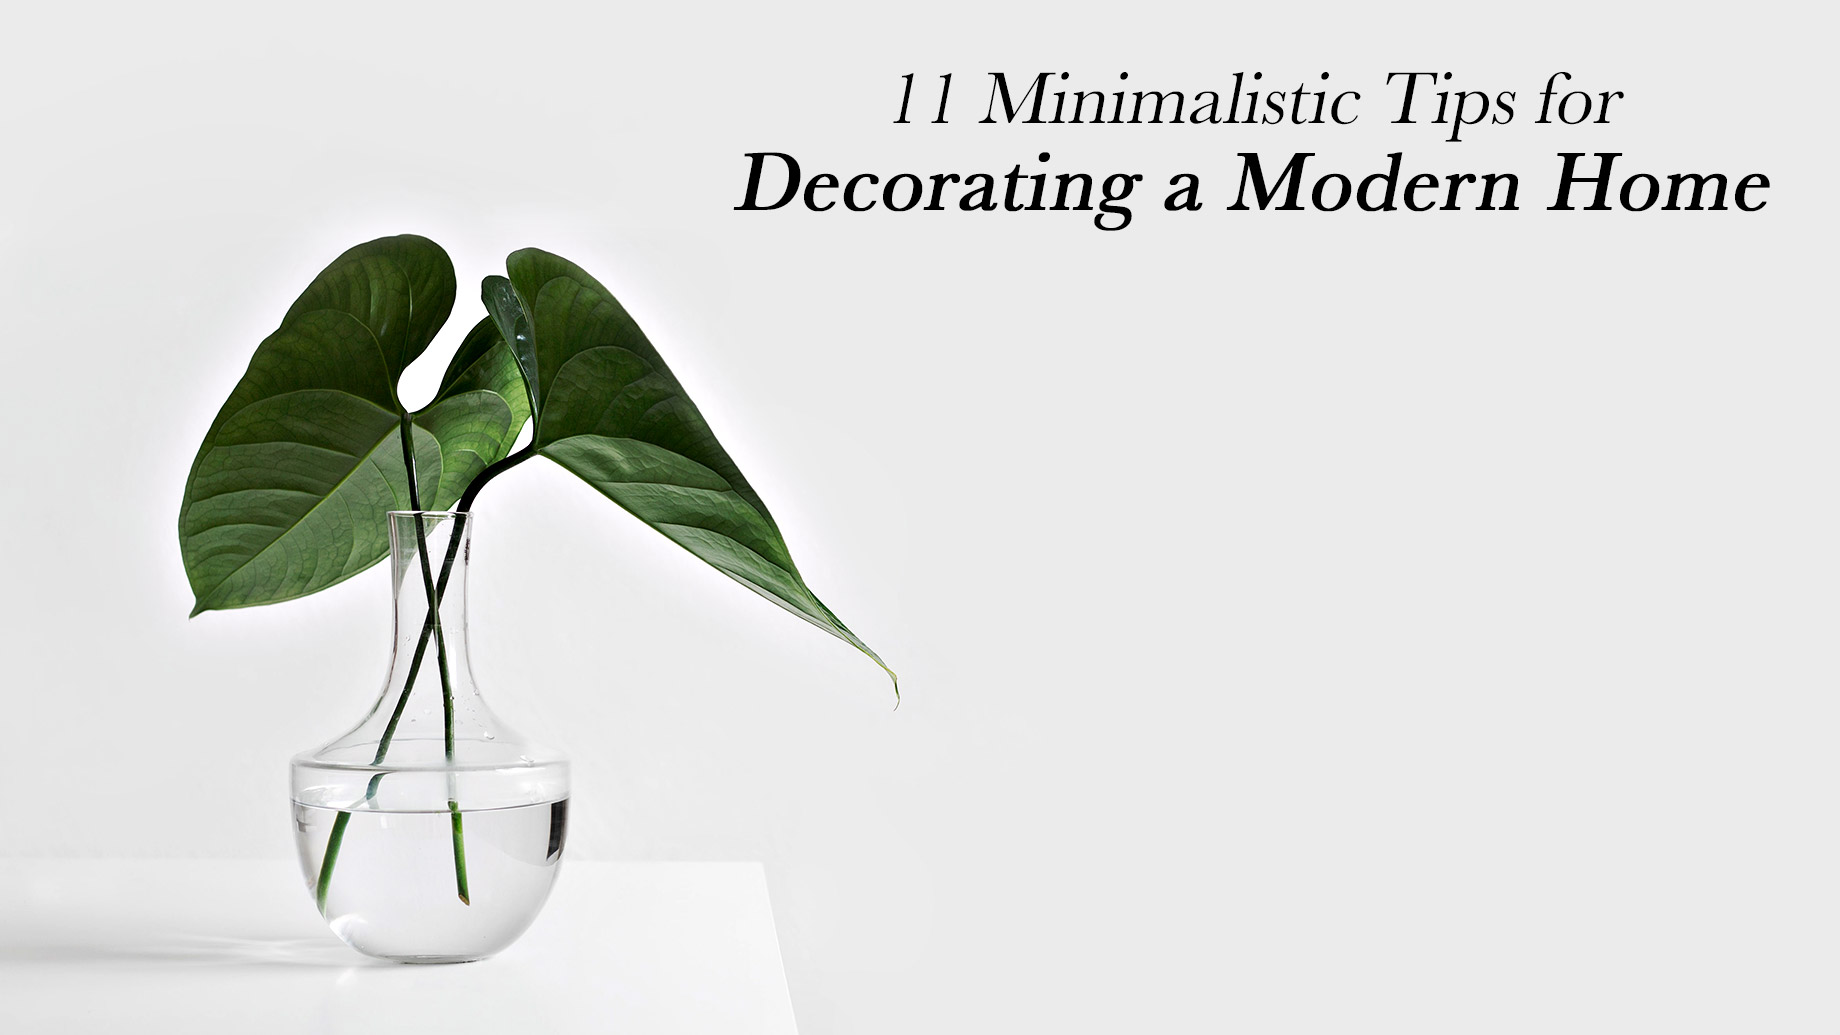 11 Minimalistic Tips for Decorating a Modern Home